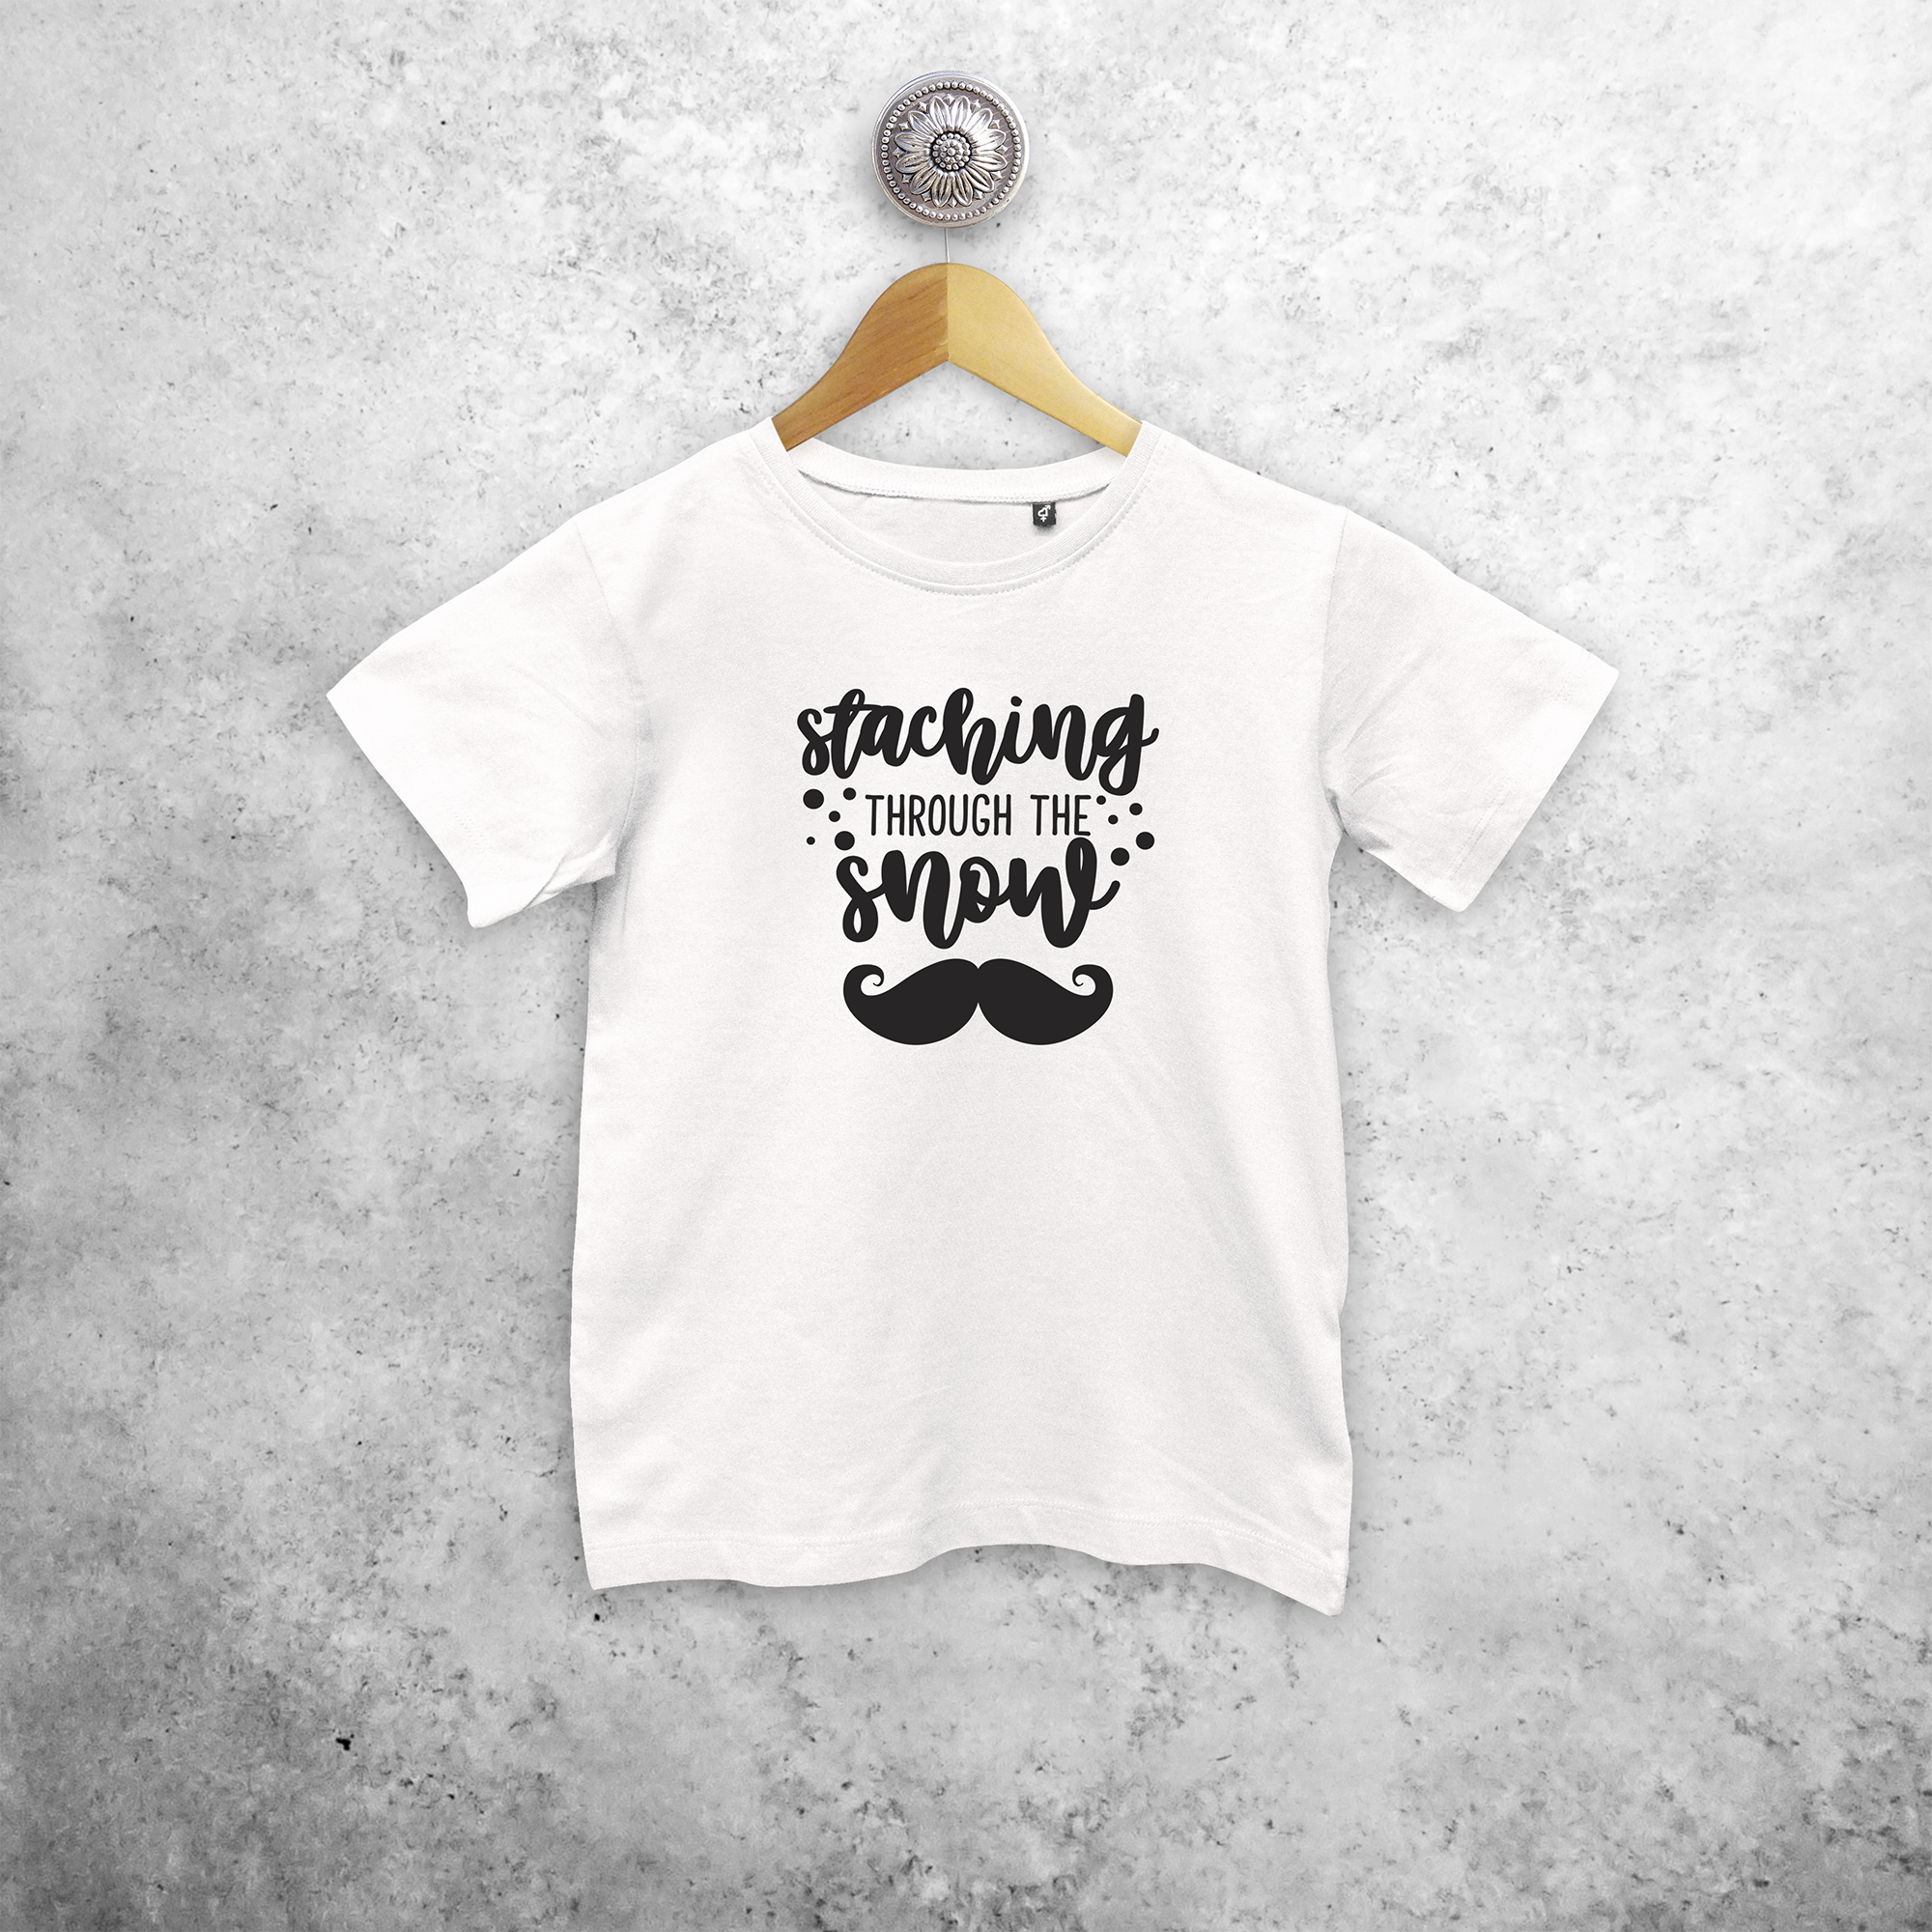 Kids shirt with short sleeves, with ‘Staching through the snow’ print by KMLeon.